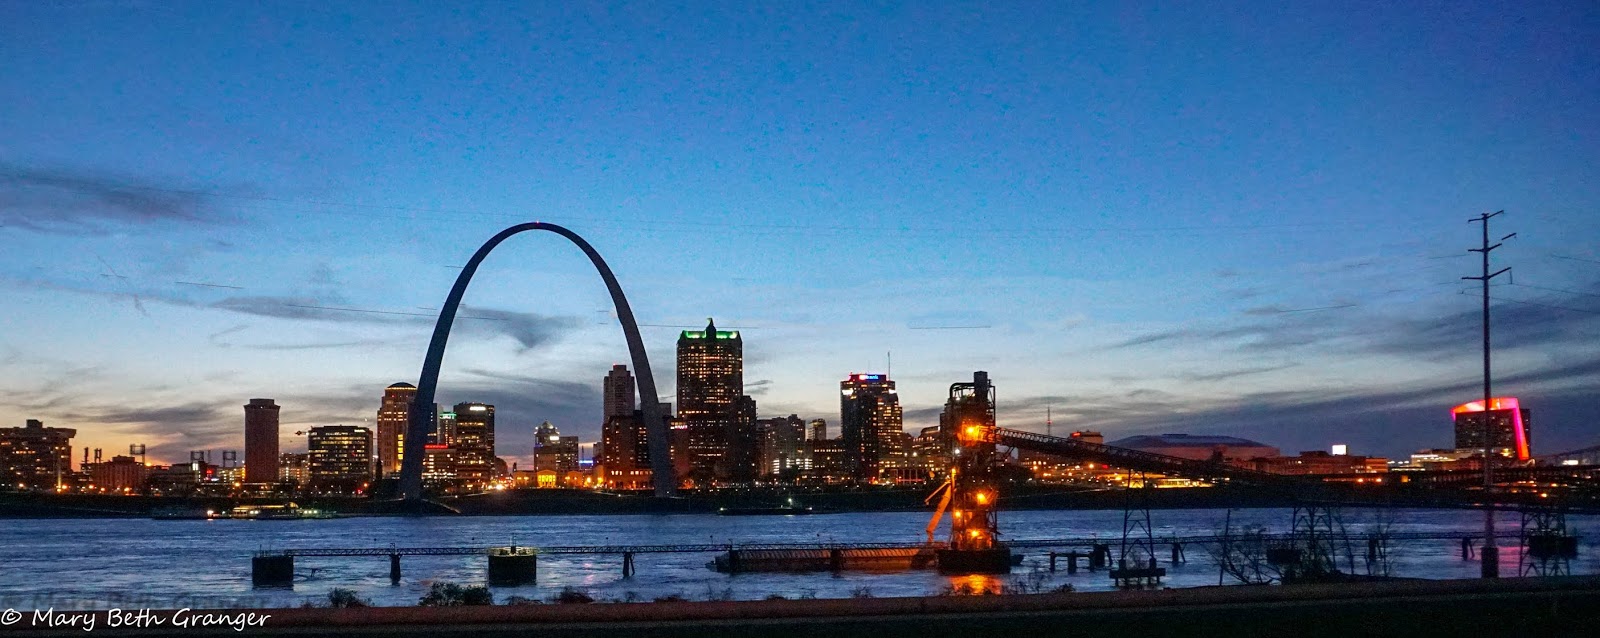 Review of Photographing the St. Louis Arch at Night